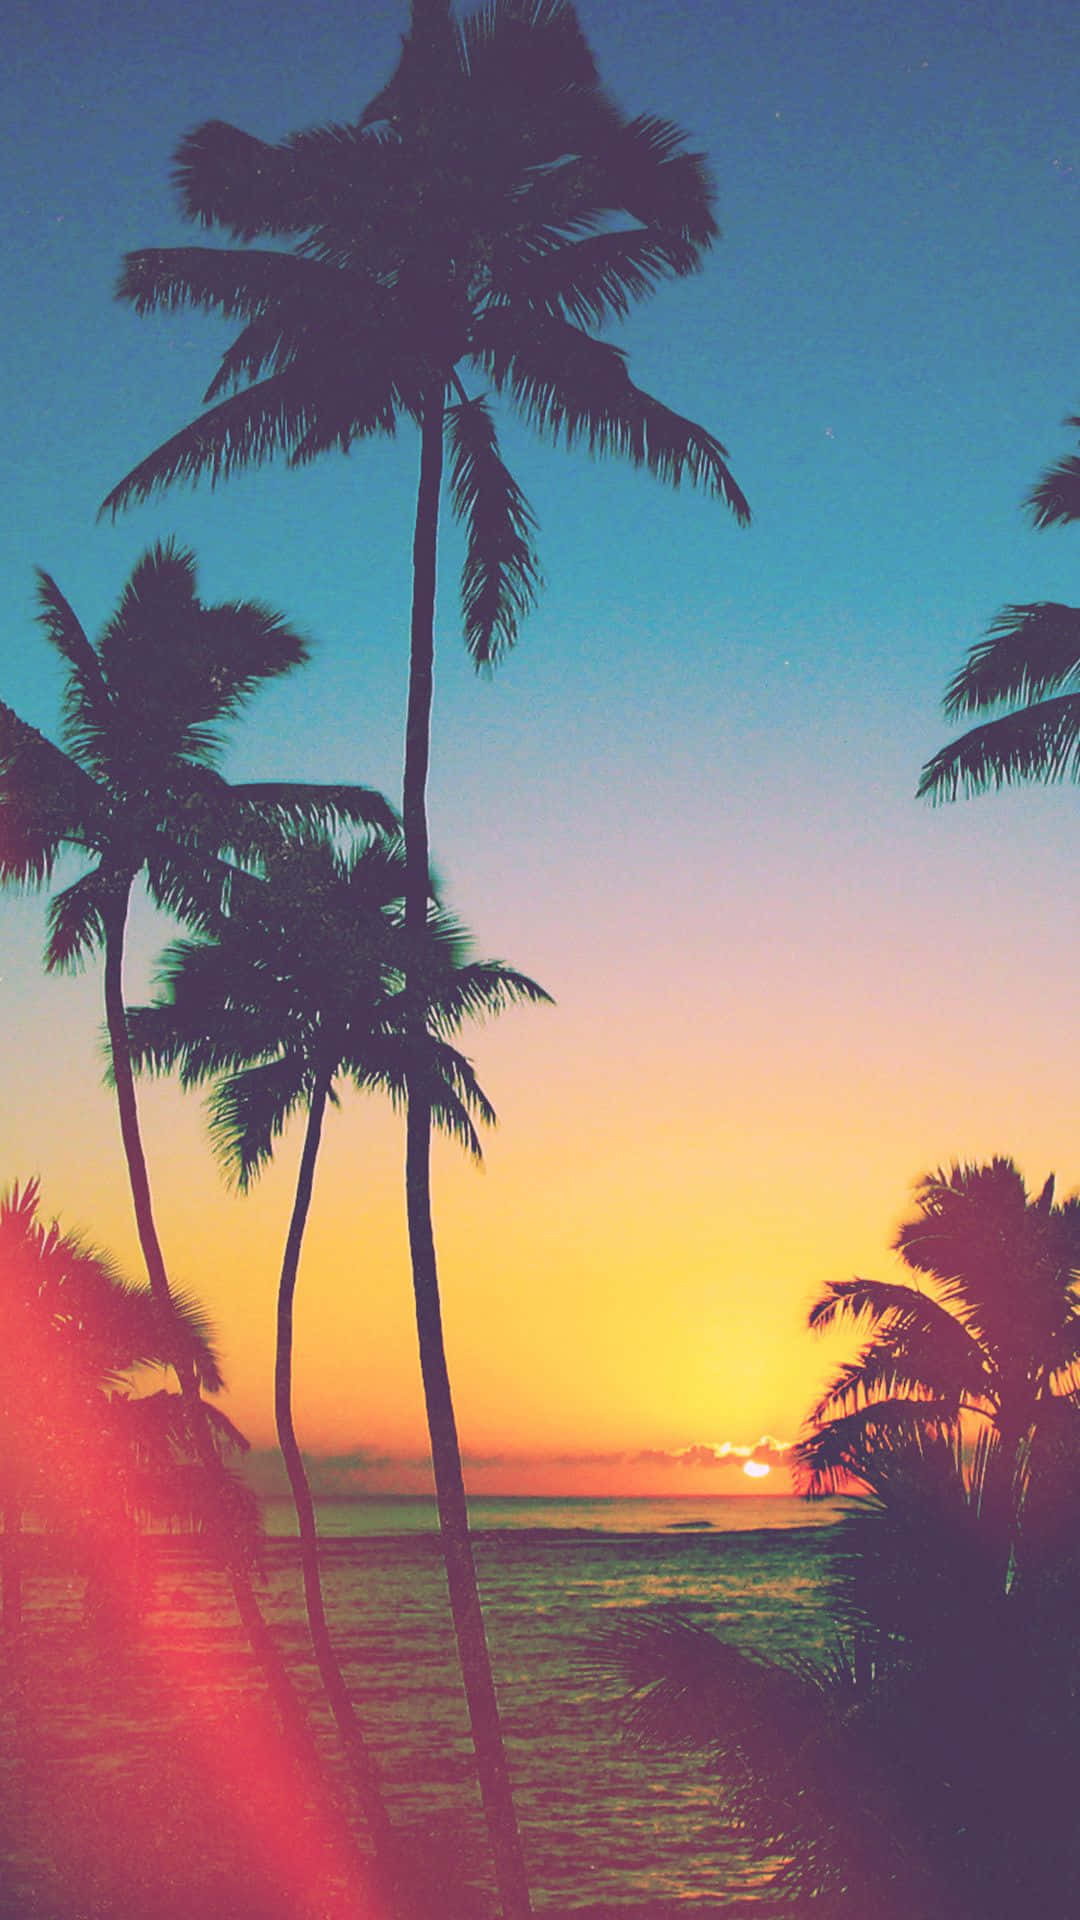 Enjoy a Beautiful Sunset While Listening to Music on a California iPhone Wallpaper